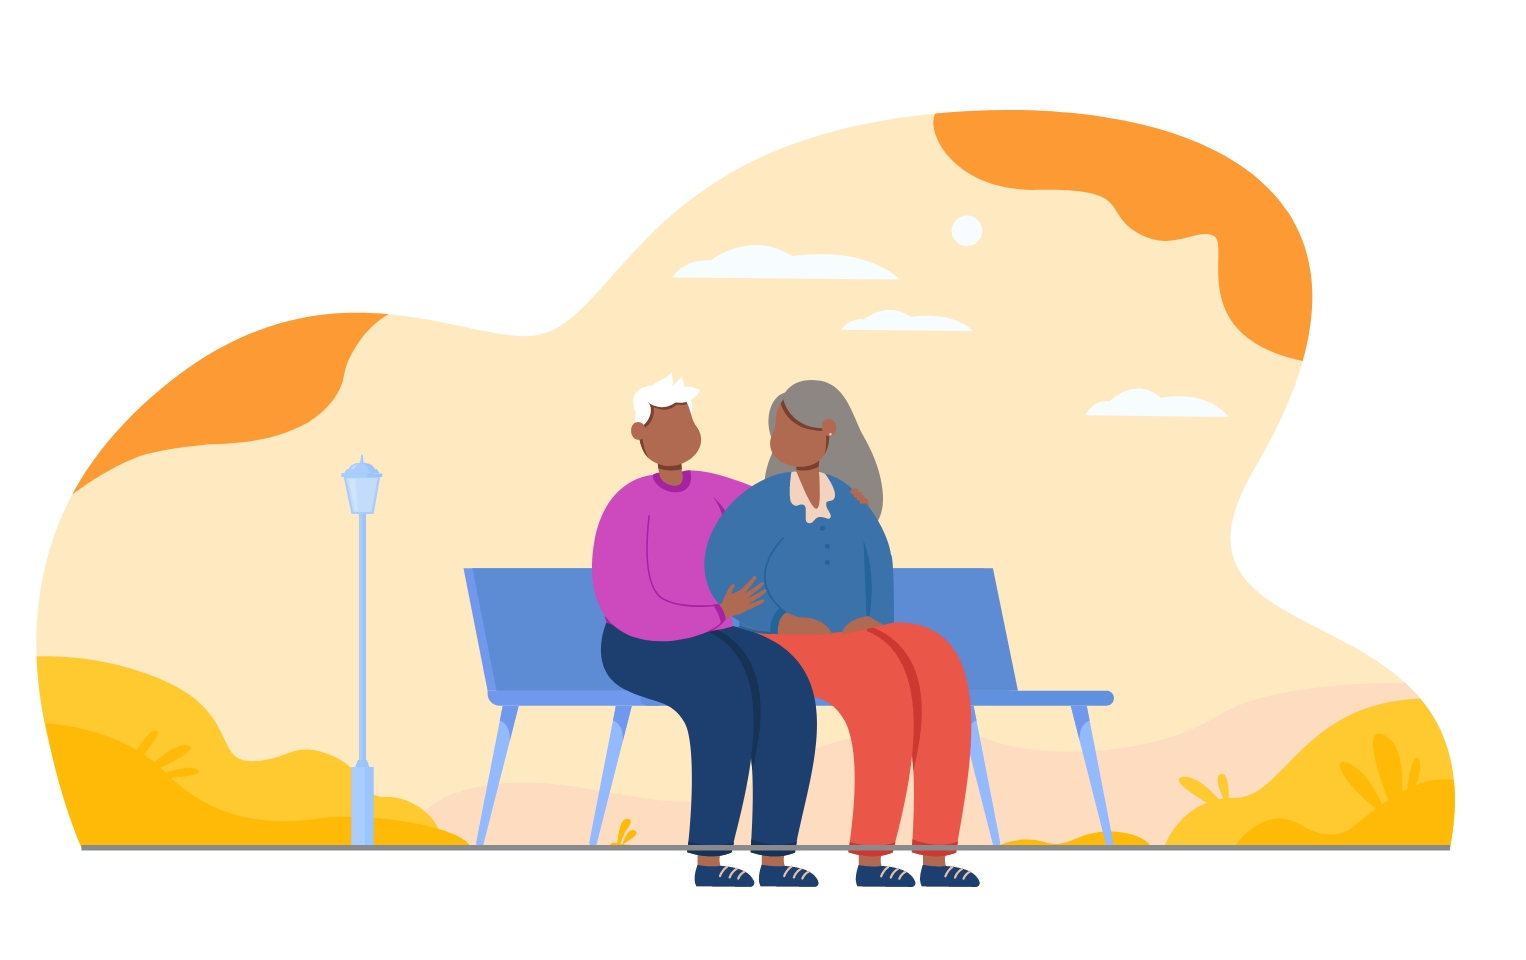 Illustration of two people sitting on a bench in the park.